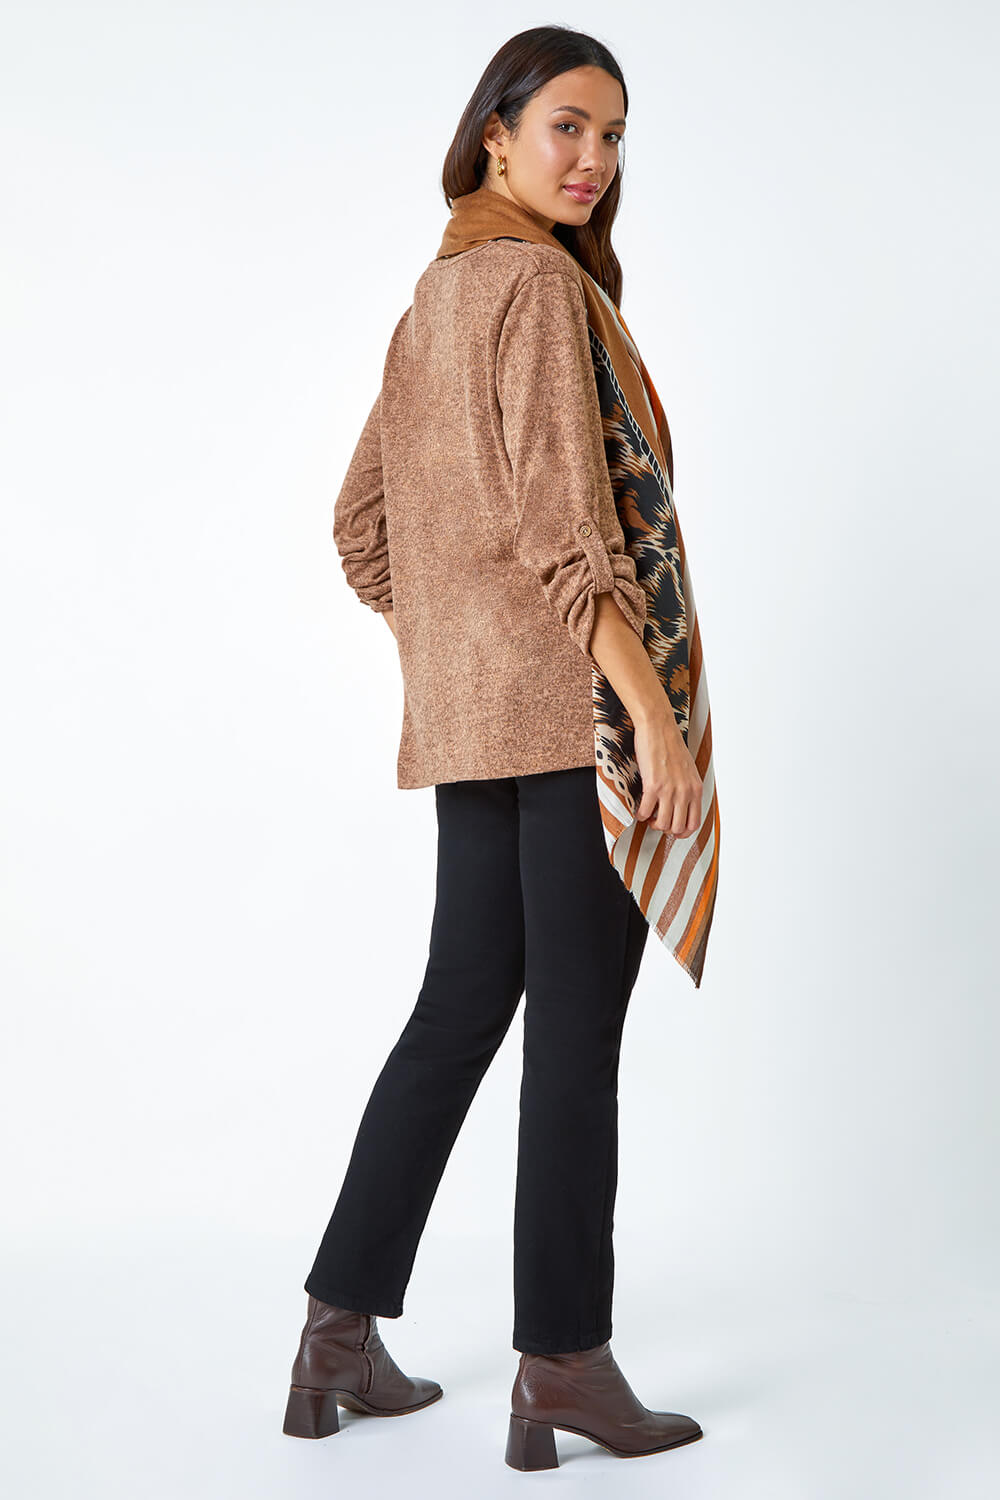 Camel  Stretch Top with Animal Print Scarf, Image 3 of 5